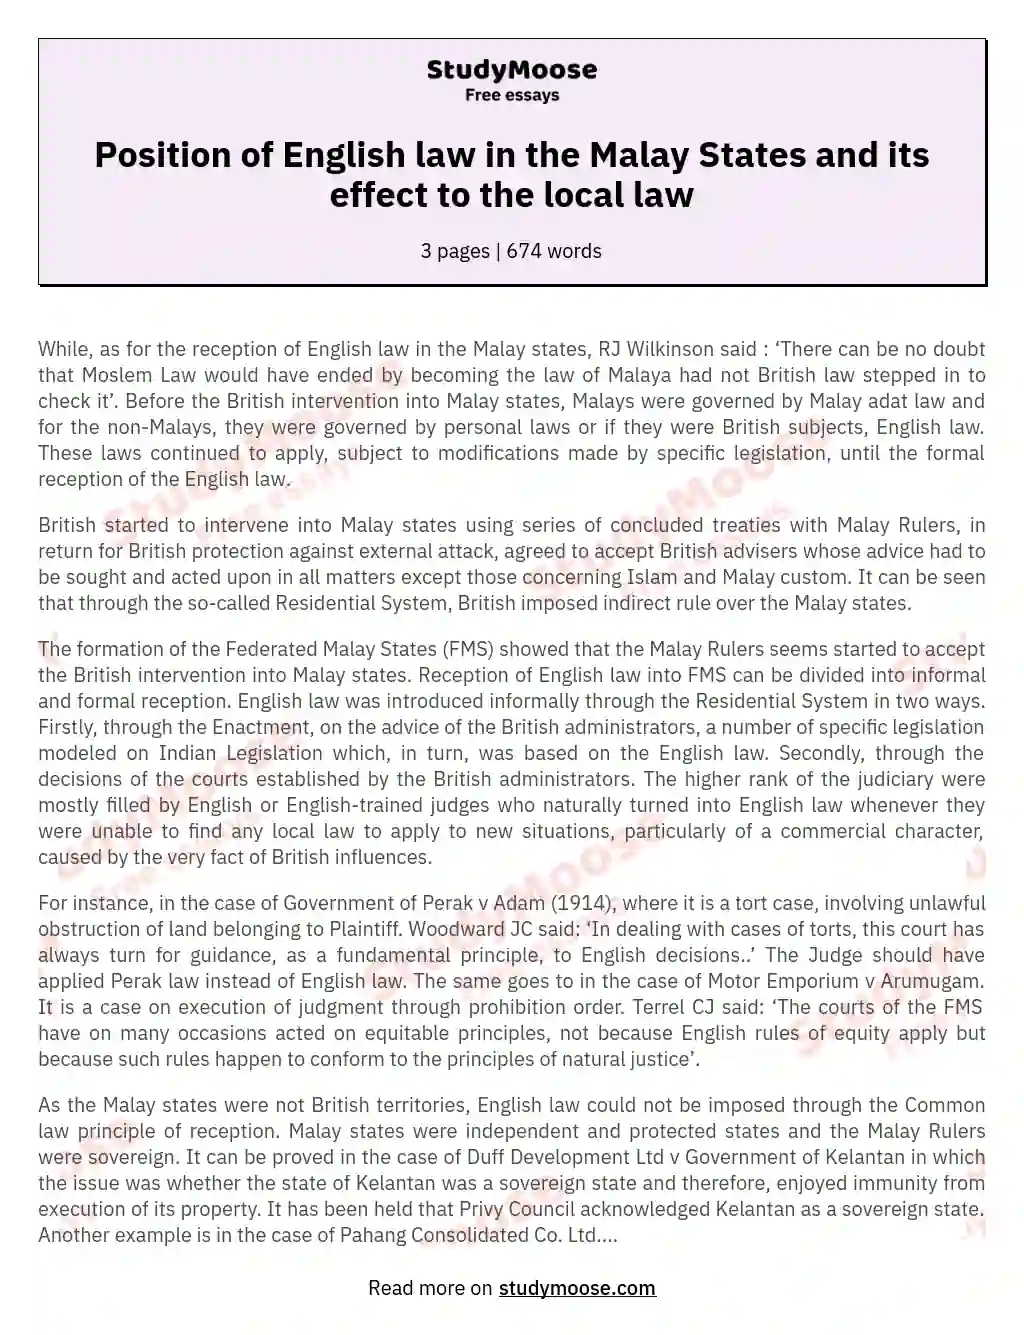 Position of English law in the Malay States and its effect to the local law